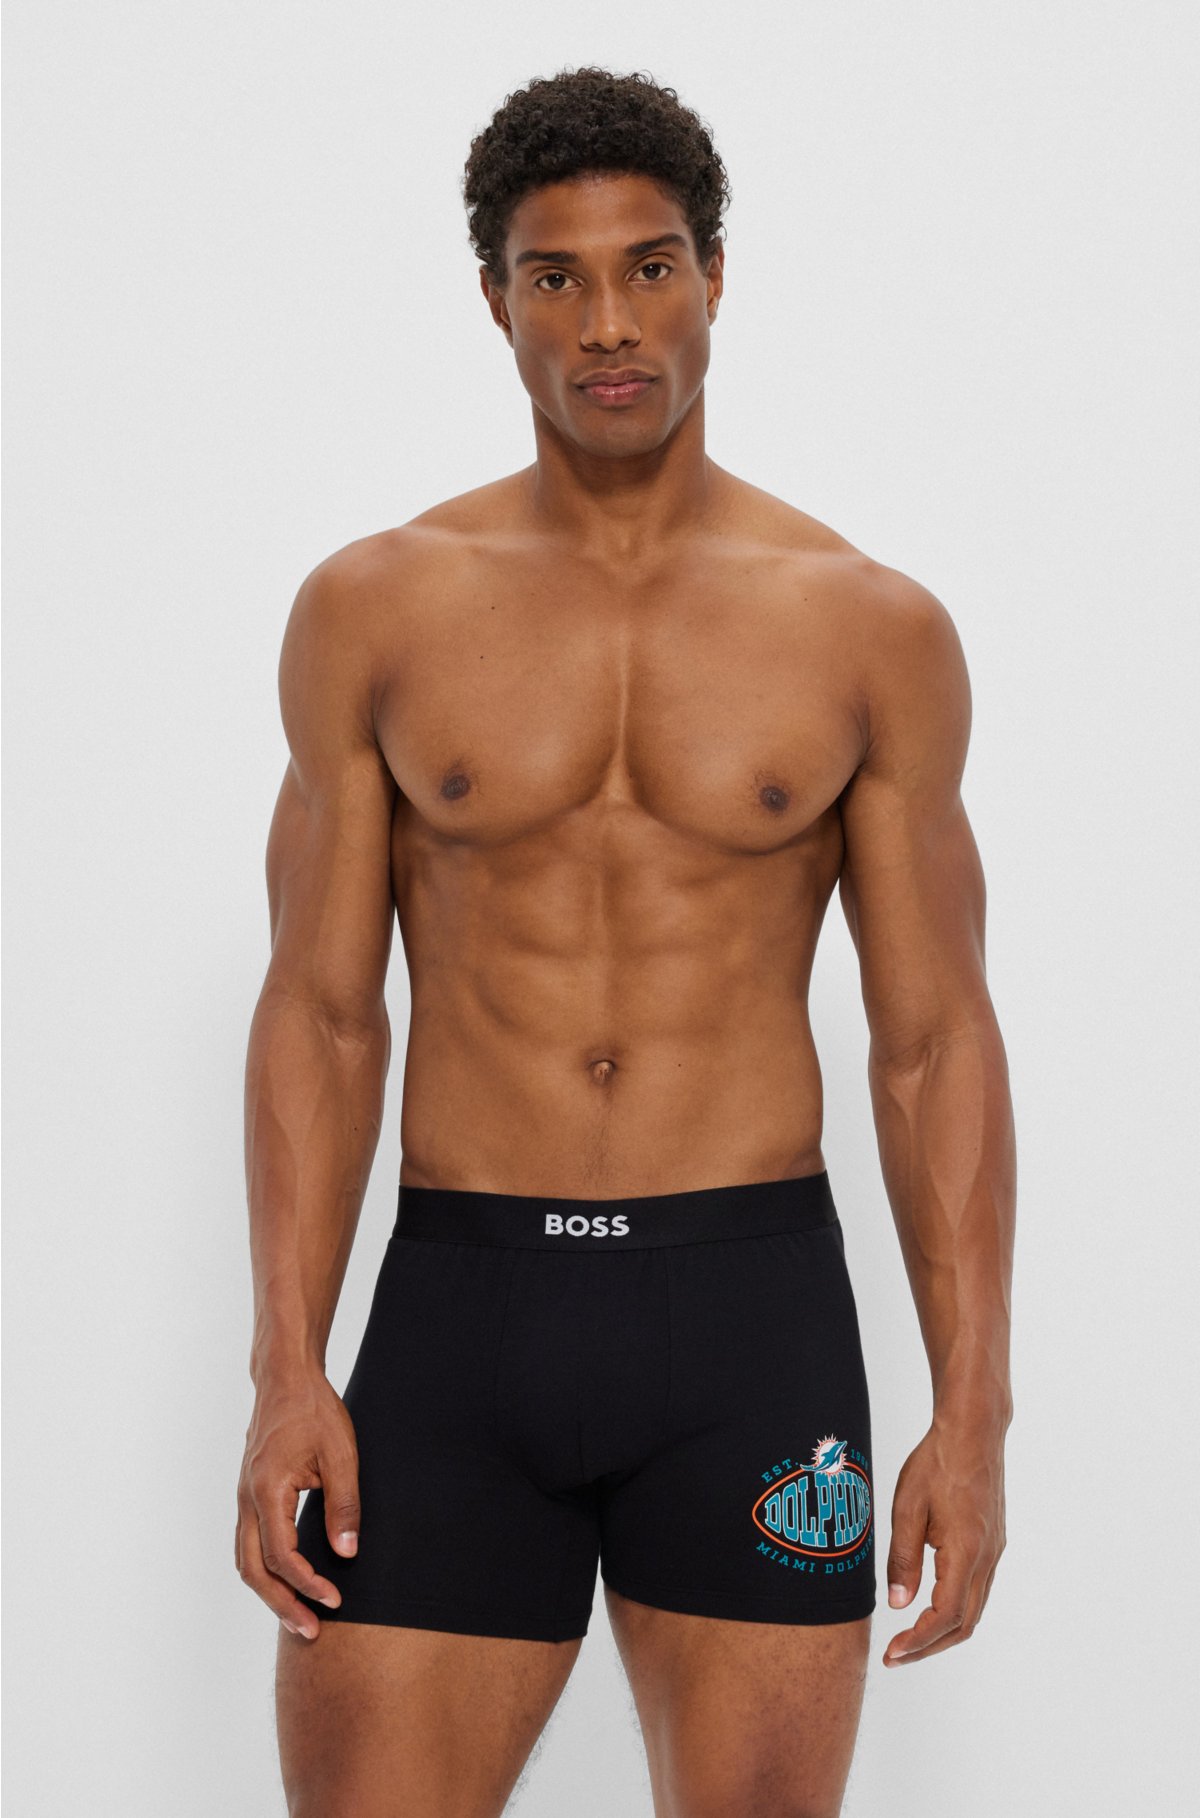 BOSS x NFL two-pack of boxer briefs with collaborative branding